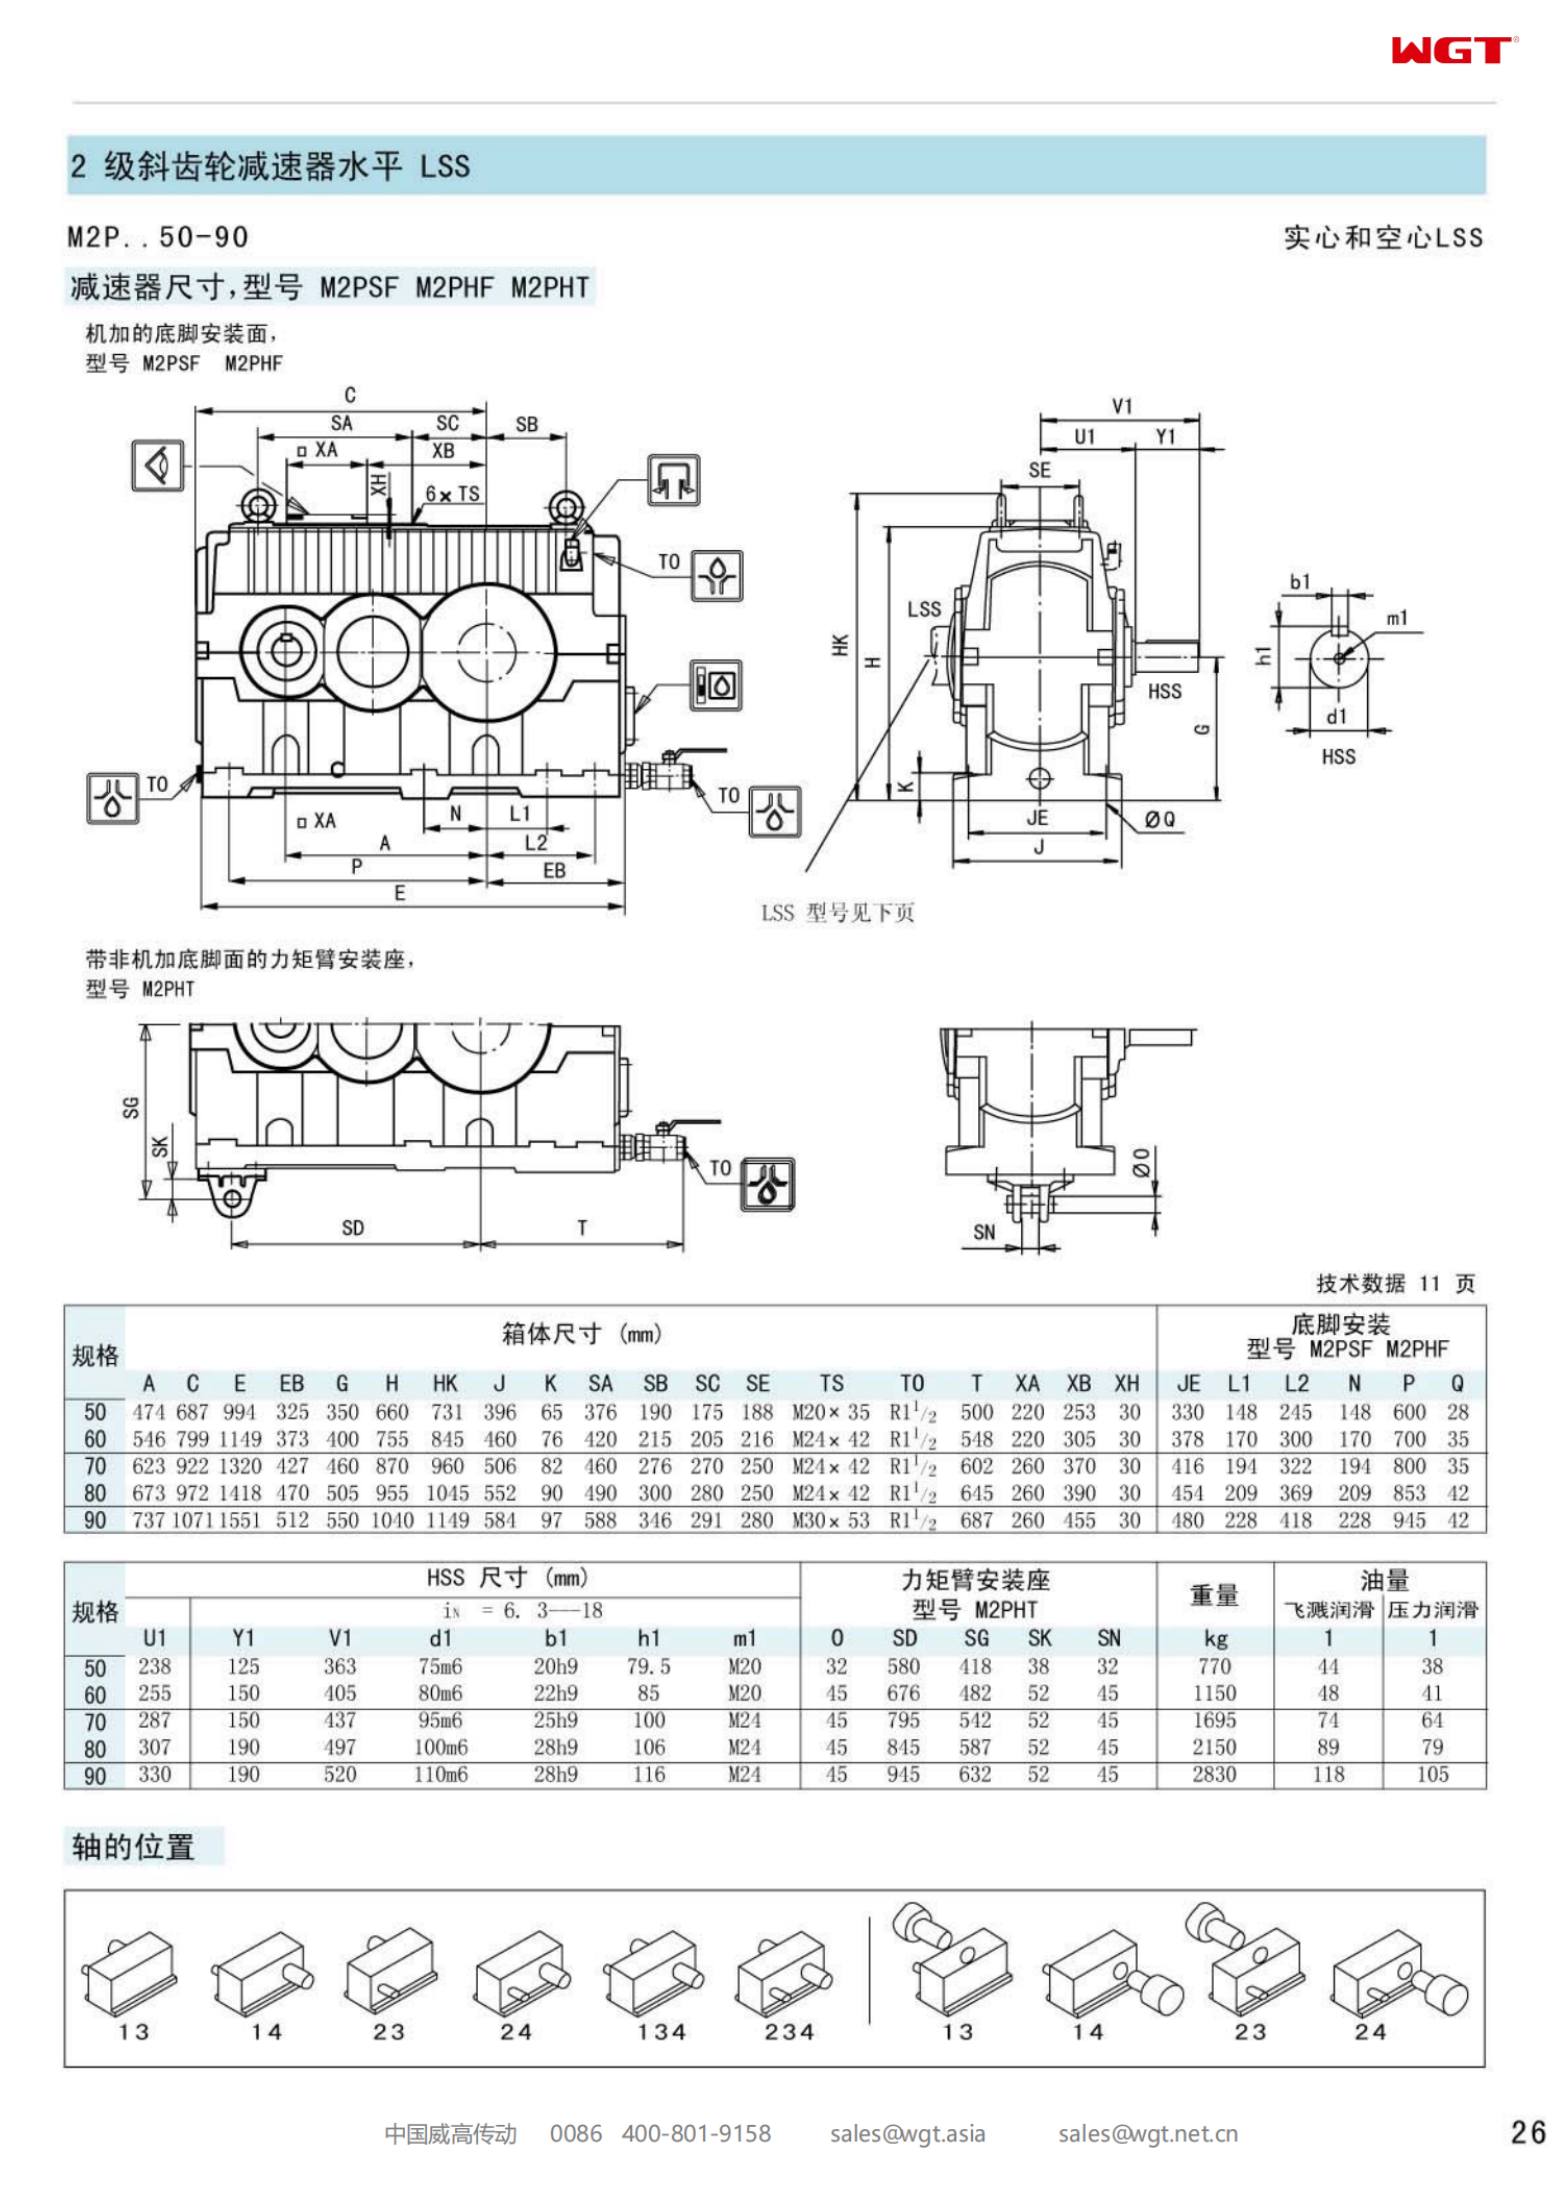 M2PHF80 Replace_SEW_M_Series Gearbox